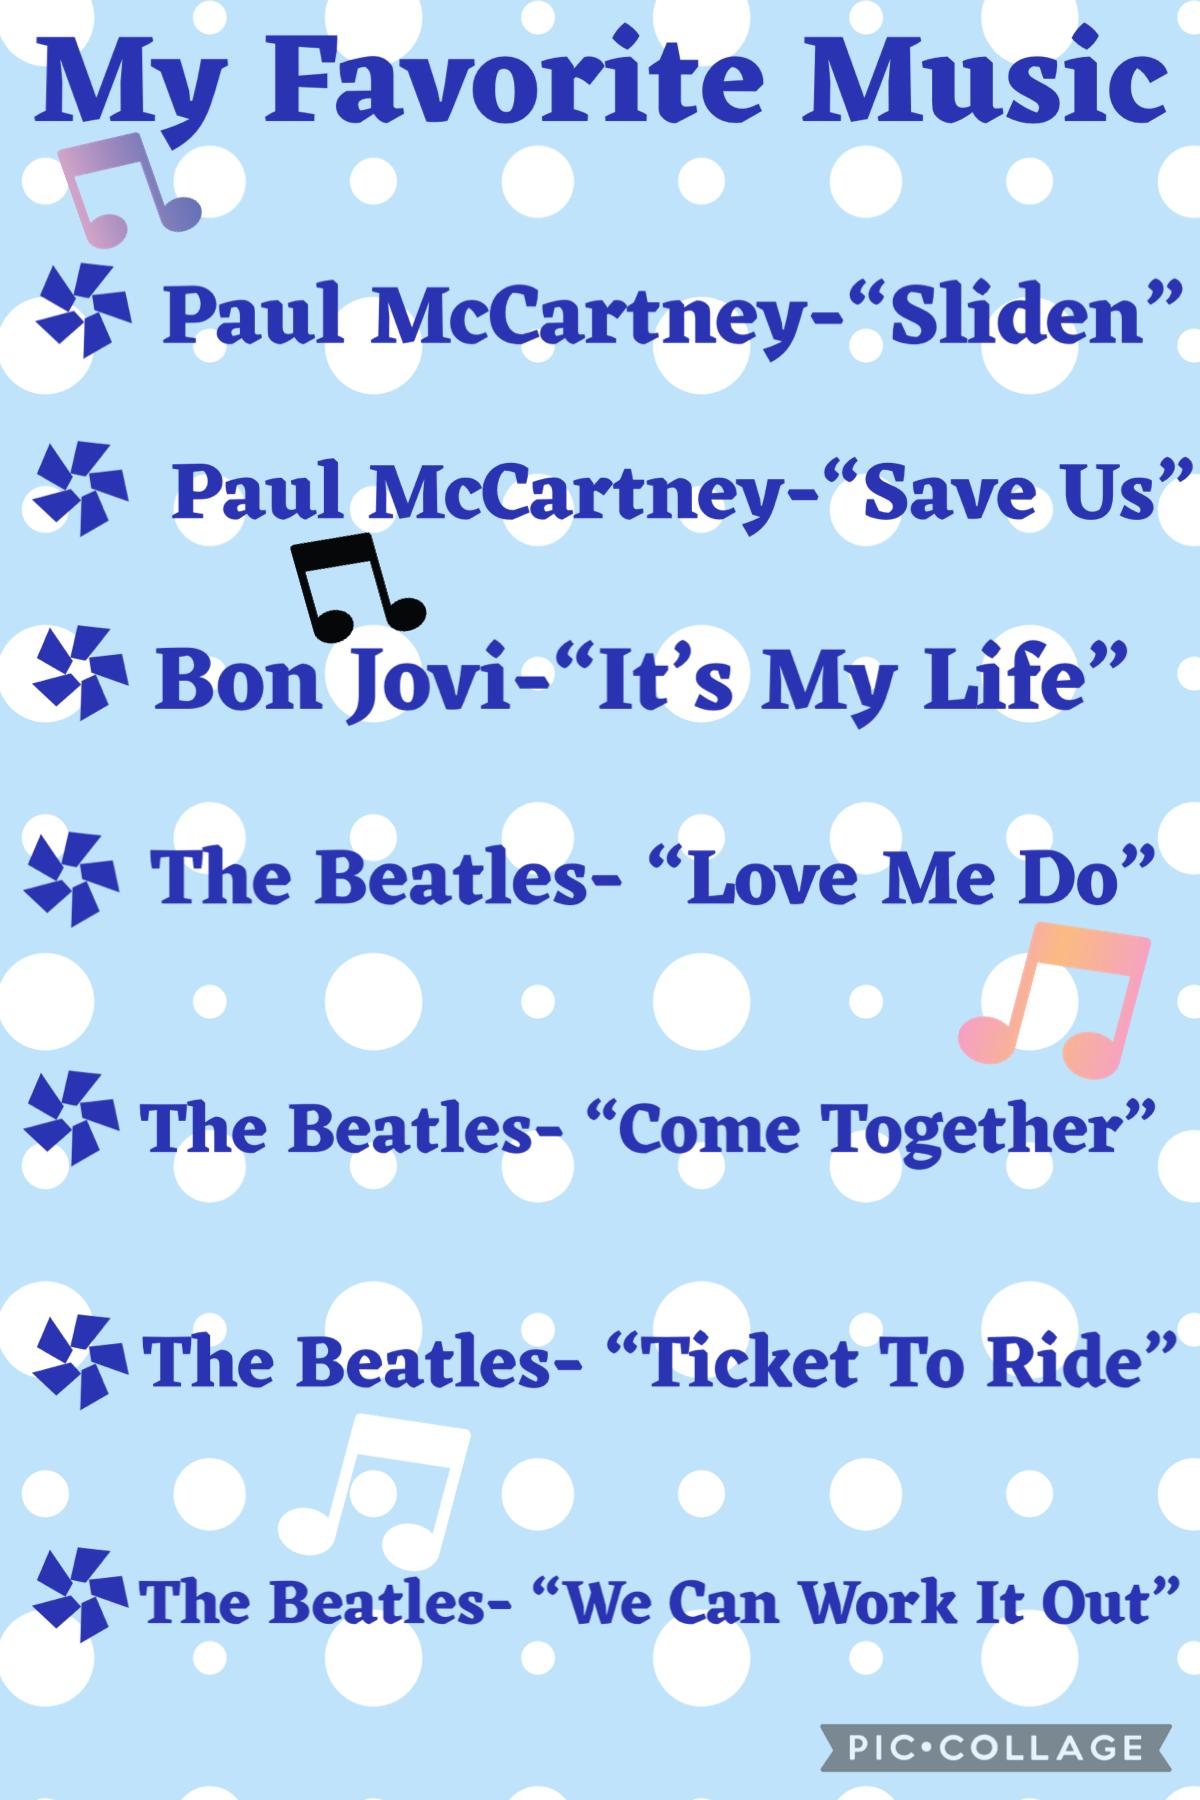 My Fav Music 🎼 
Paul McCartney- “Slidin”
Paul McCartney-“Save Us”
Bon Jovi -“It’s My Life”
The Beatles - “Love Me Do”
The Beatles - “Come Together”
The Beatles -“Ticket To Ride”
The Beatles -“We Can Work It Out”
Comment Or Remix if you have heard any of t